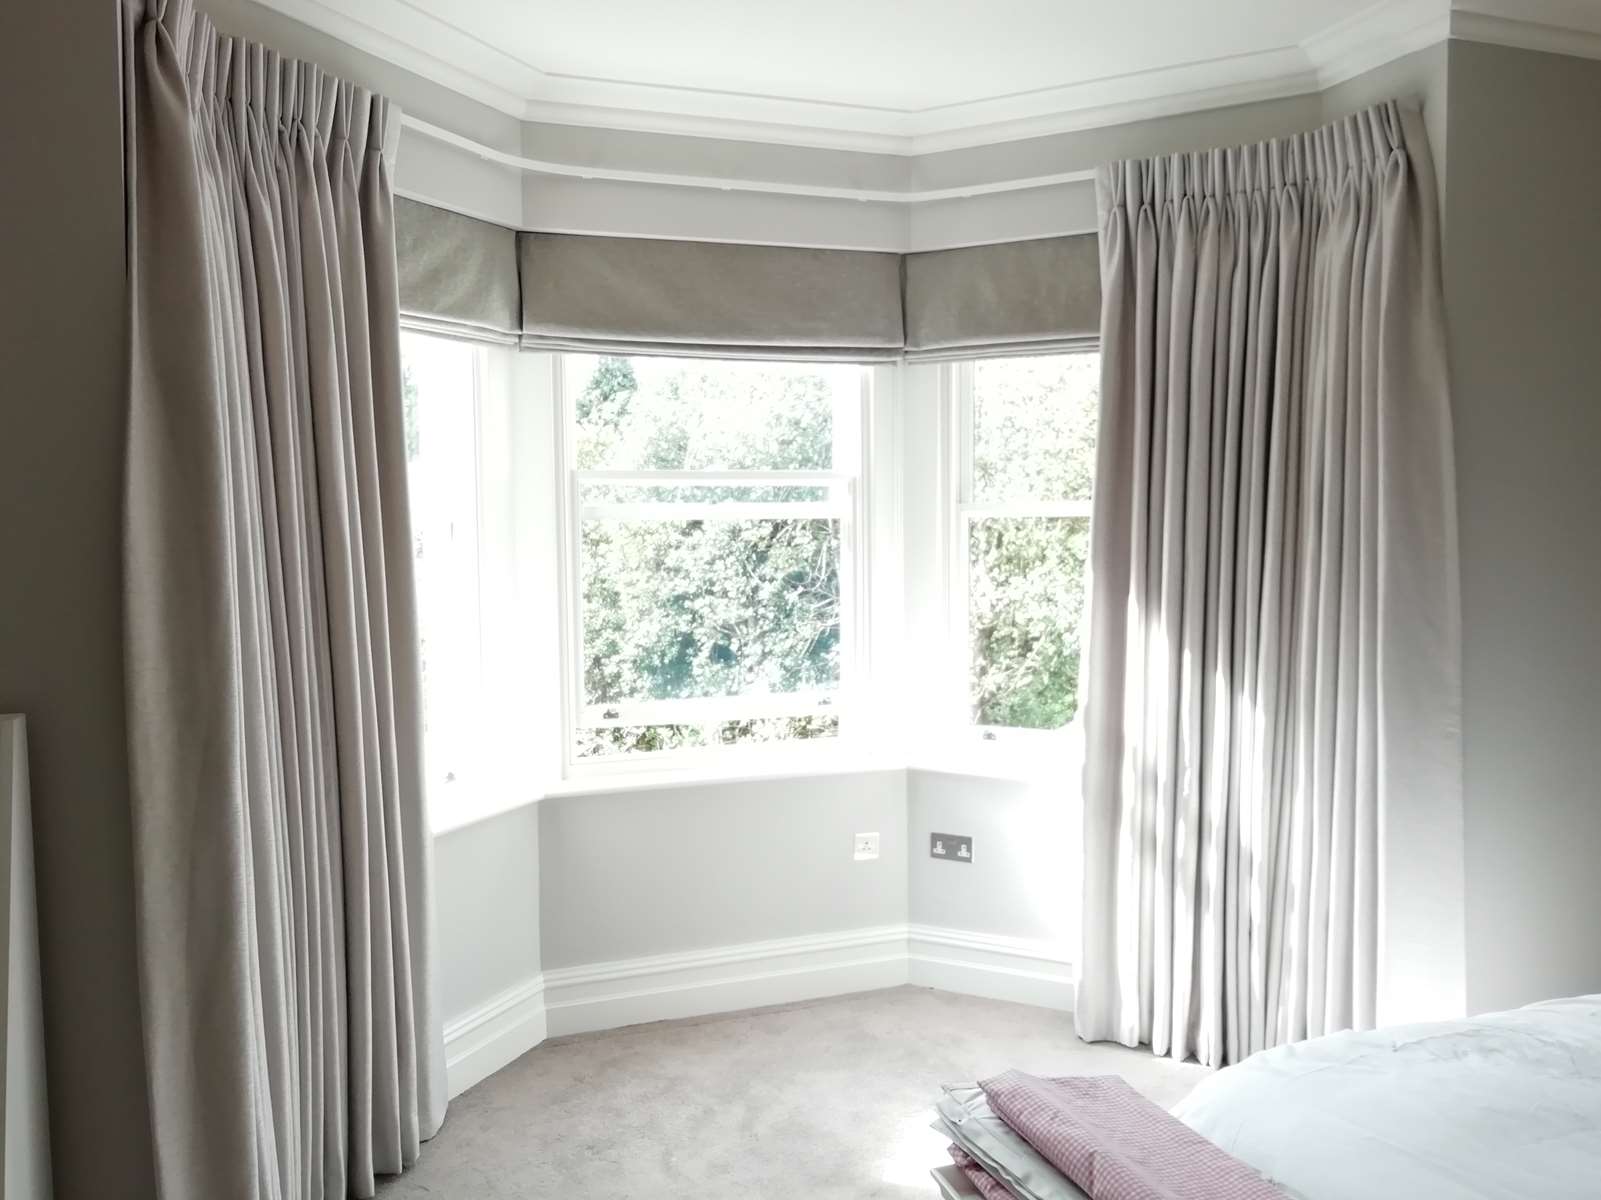 How To Fit Curtain Tracks For Bay Windows